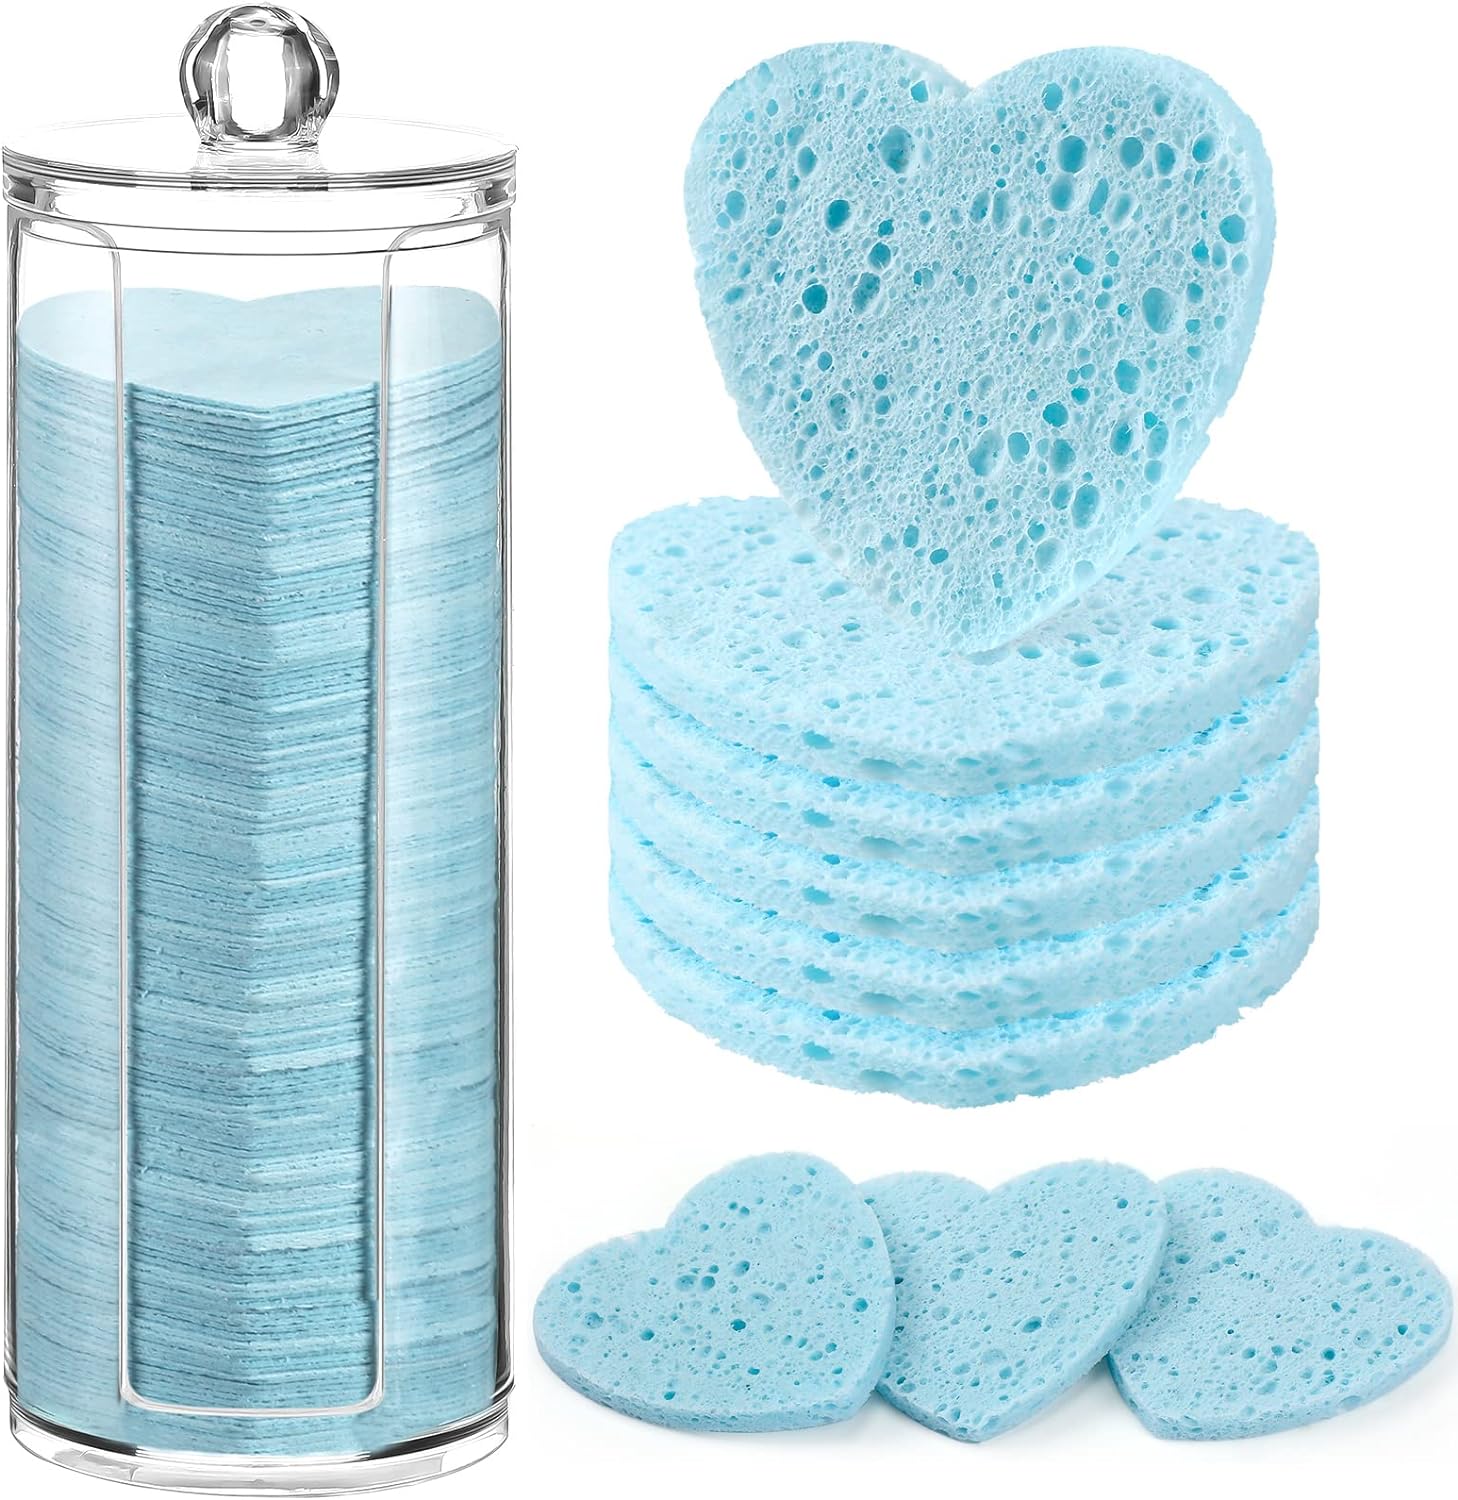 120 Pcs Compressed Facial Sponges with Container Heart Shape Face Sponge Natural Disposable Sponge Pads for Washing Face Cleansing Exfoliating Esthetician Makeup Removal (Light Blue)